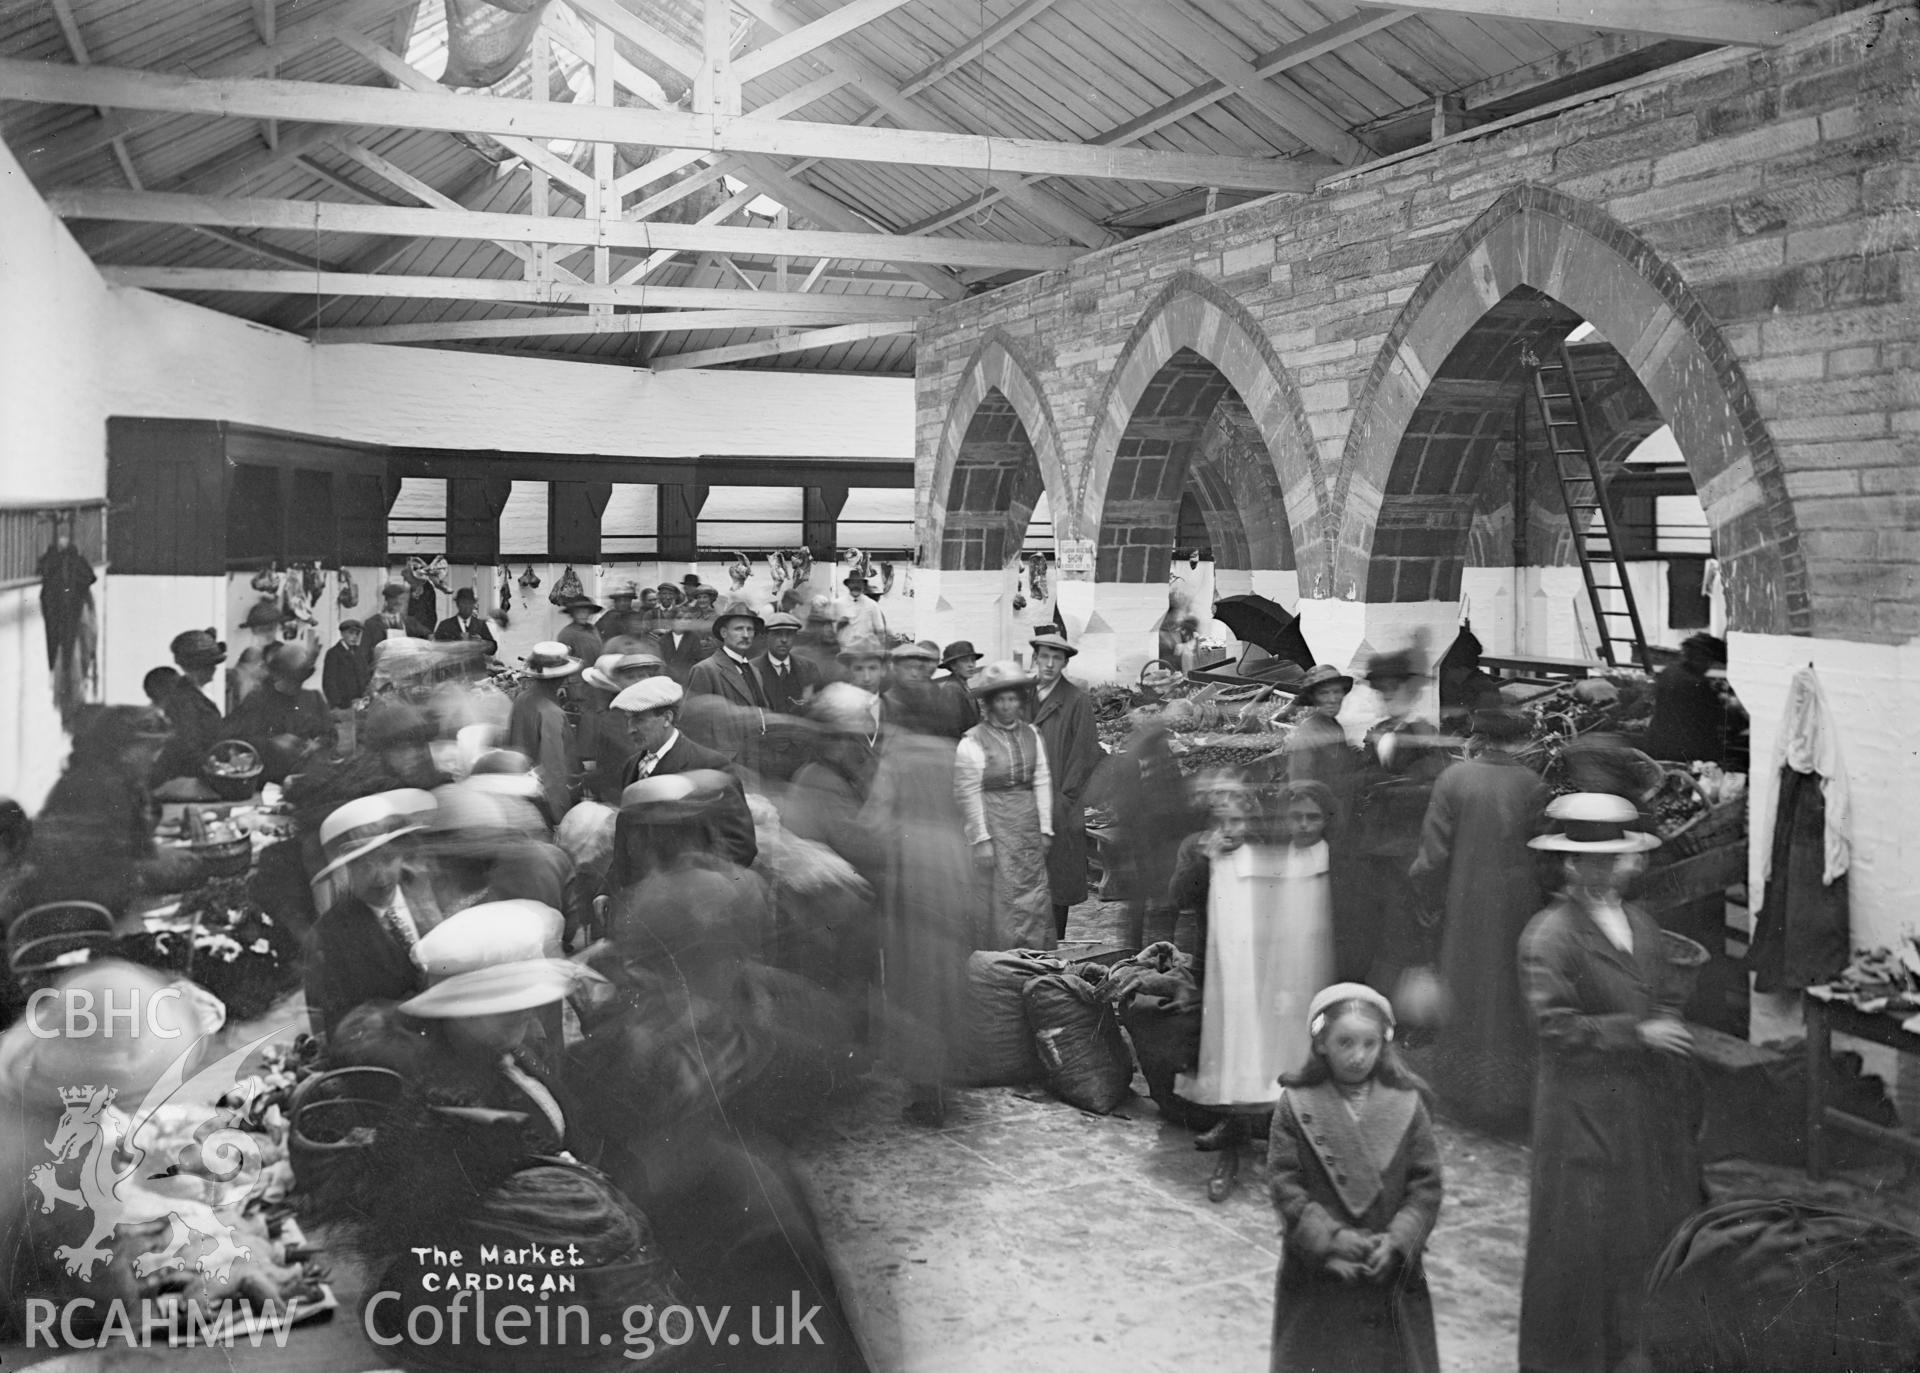 Black and white glass negative showing interior view of "The Market, Cardigan"